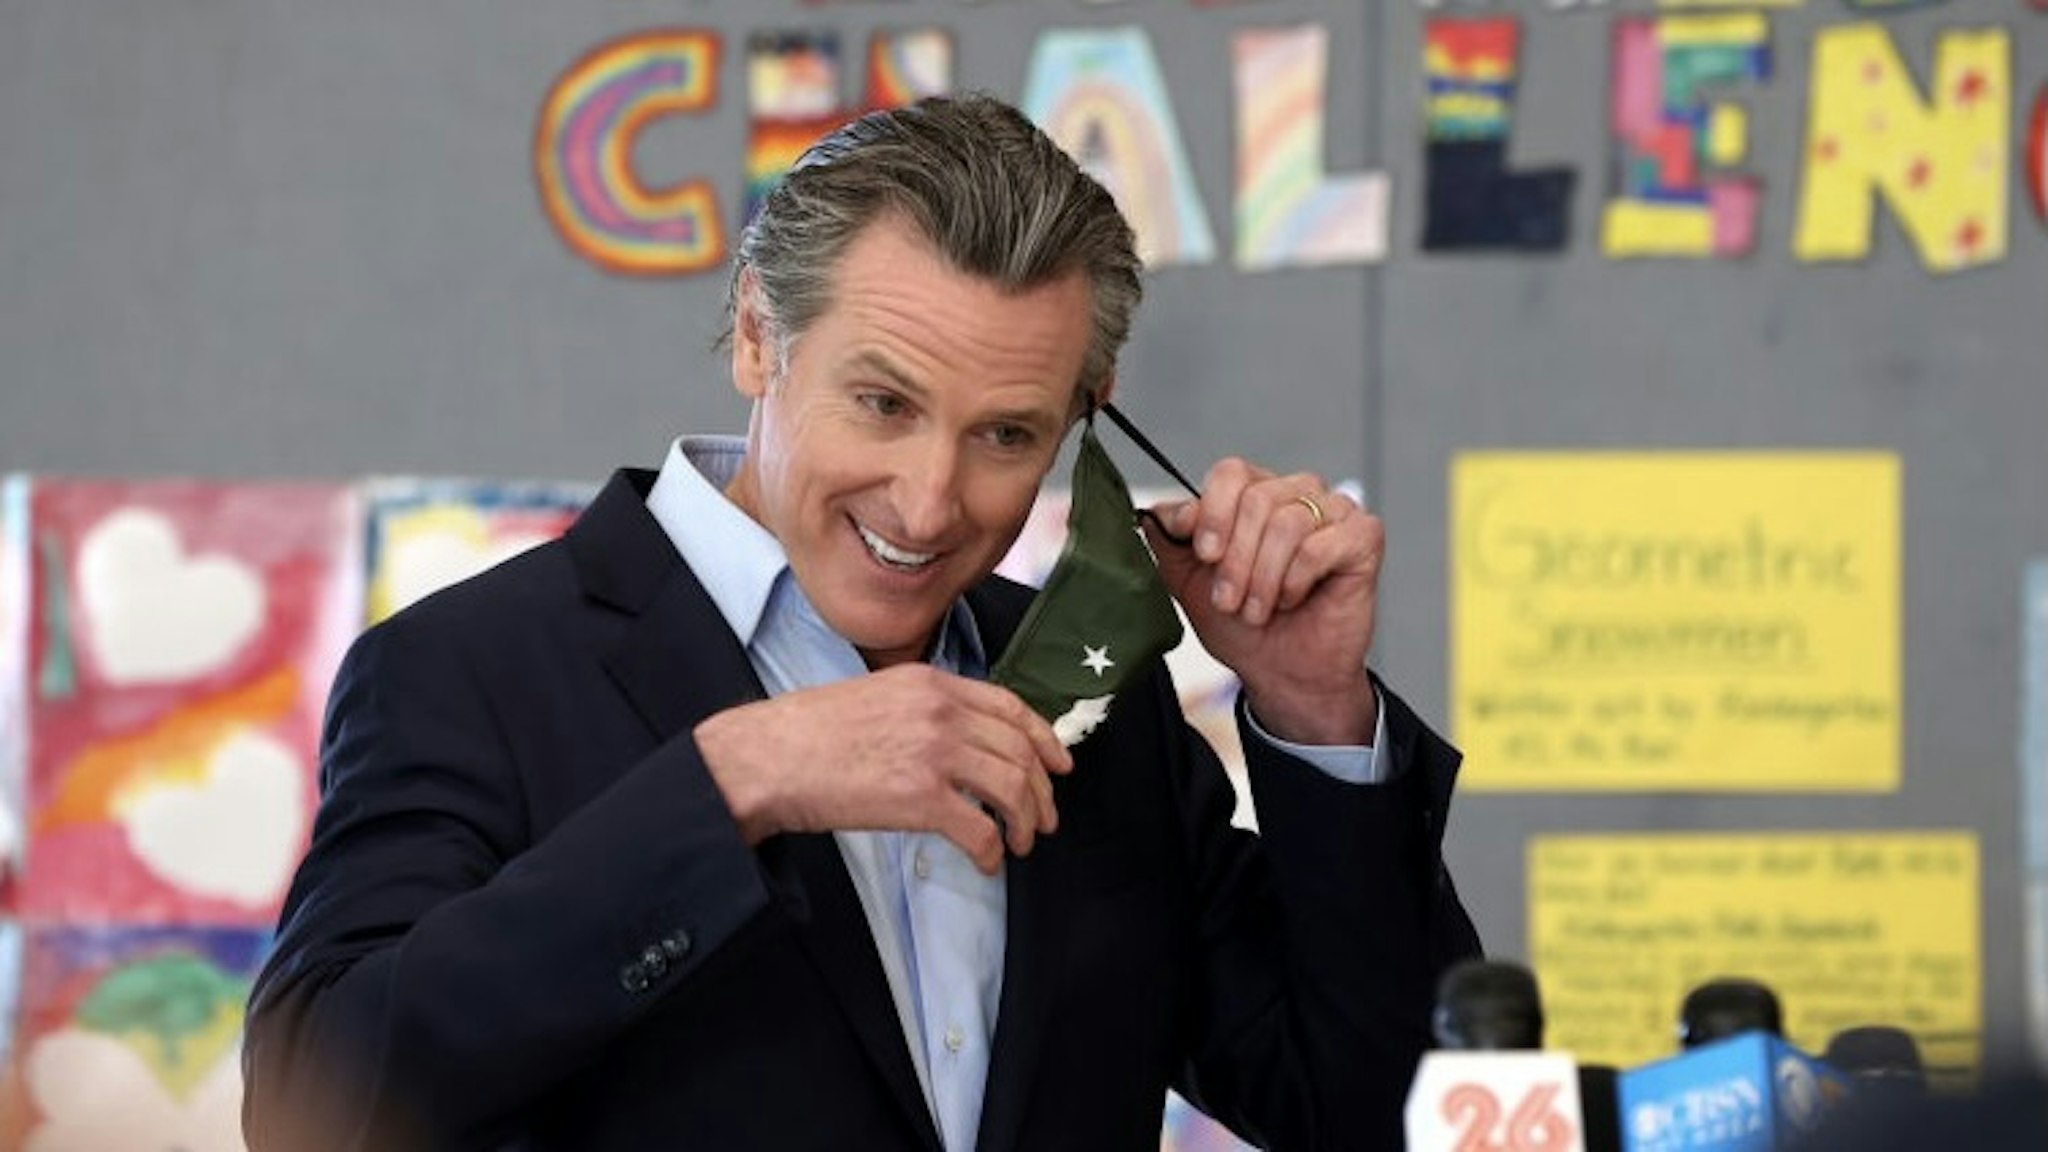 Governor Gavin Newsom Visits School To Highlight State's Reopening Efforts ALAMEDA, CALIFORNIA - MARCH 16: California Gov. Gavin Newsom removes his mask before speaking during a news conference after he toured the newly reopened Ruby Bridges Elementary School on March 16, 2021 in Alameda, California. Gov. Newsom is traveling throughout California to highlight the state's efforts to reopen schools and businesses as he faces the threat of recall. (Photo by Justin Sullivan/Getty Images) Justin Sullivan / Staff via Getty Images